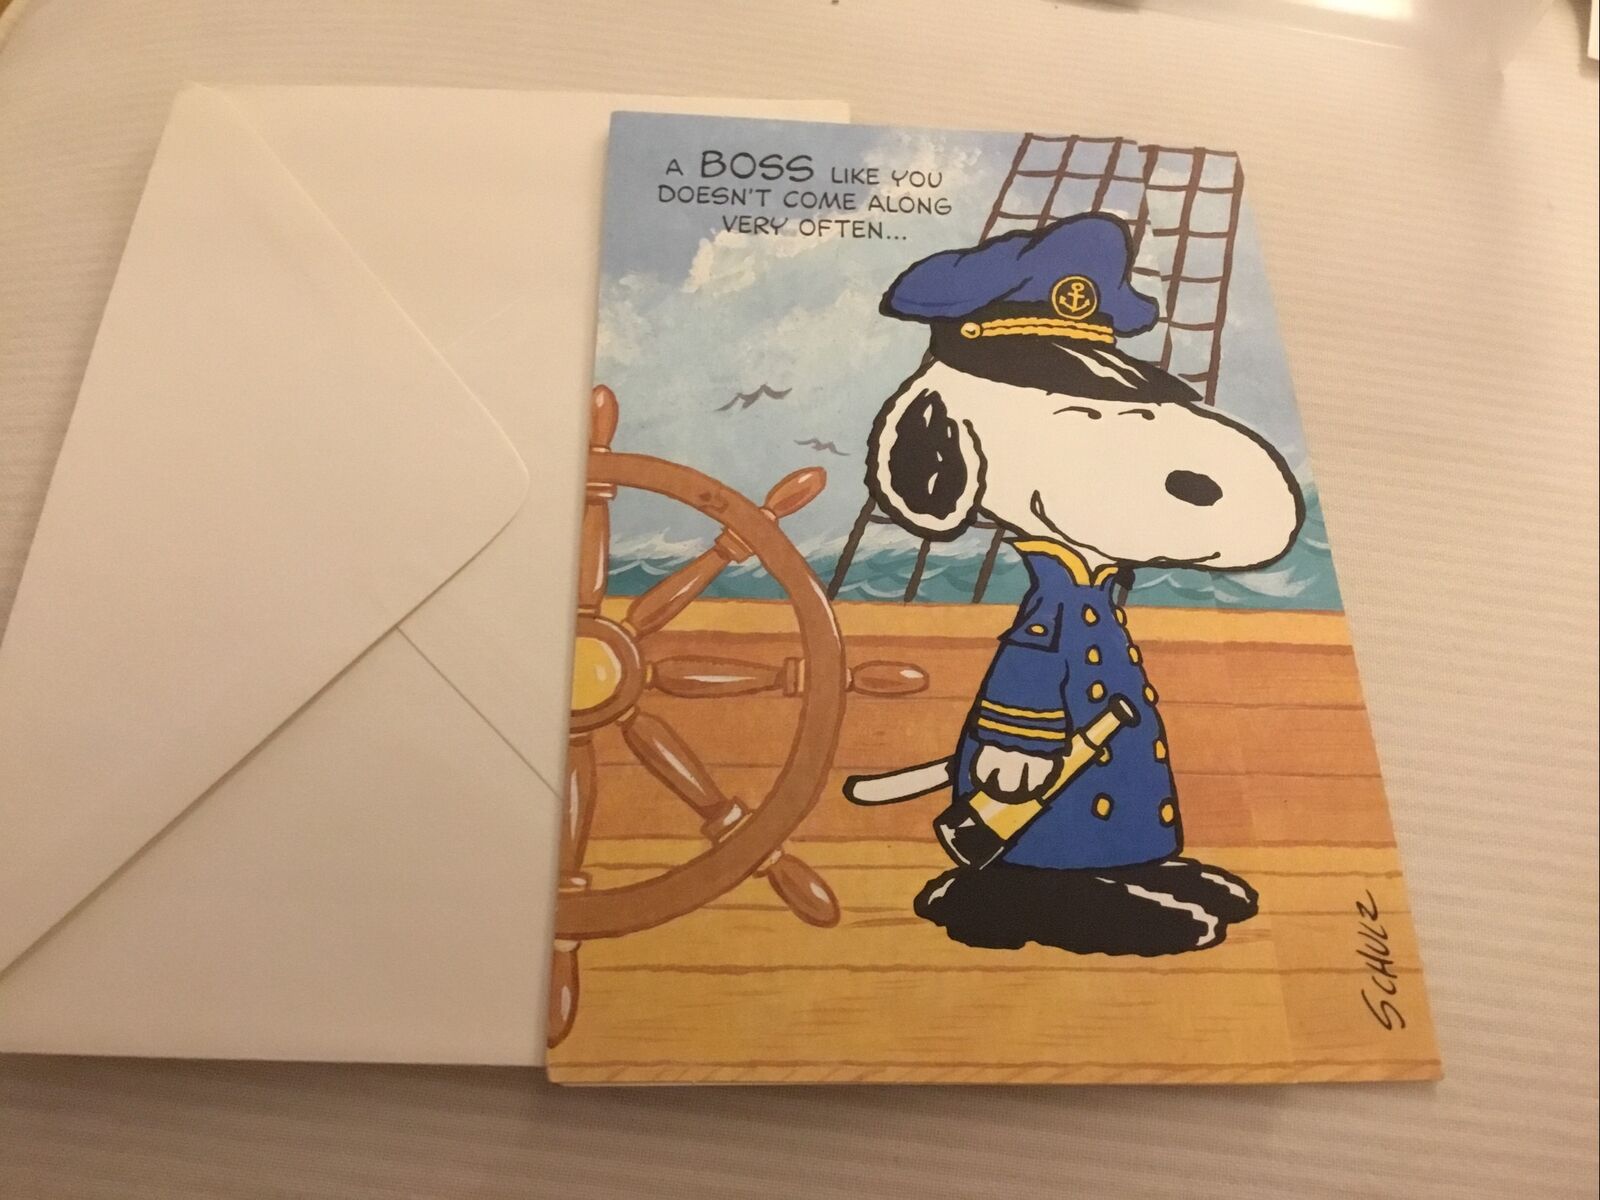 peanuts snoopy charles schulz woodstock boss card goofing off Birthday